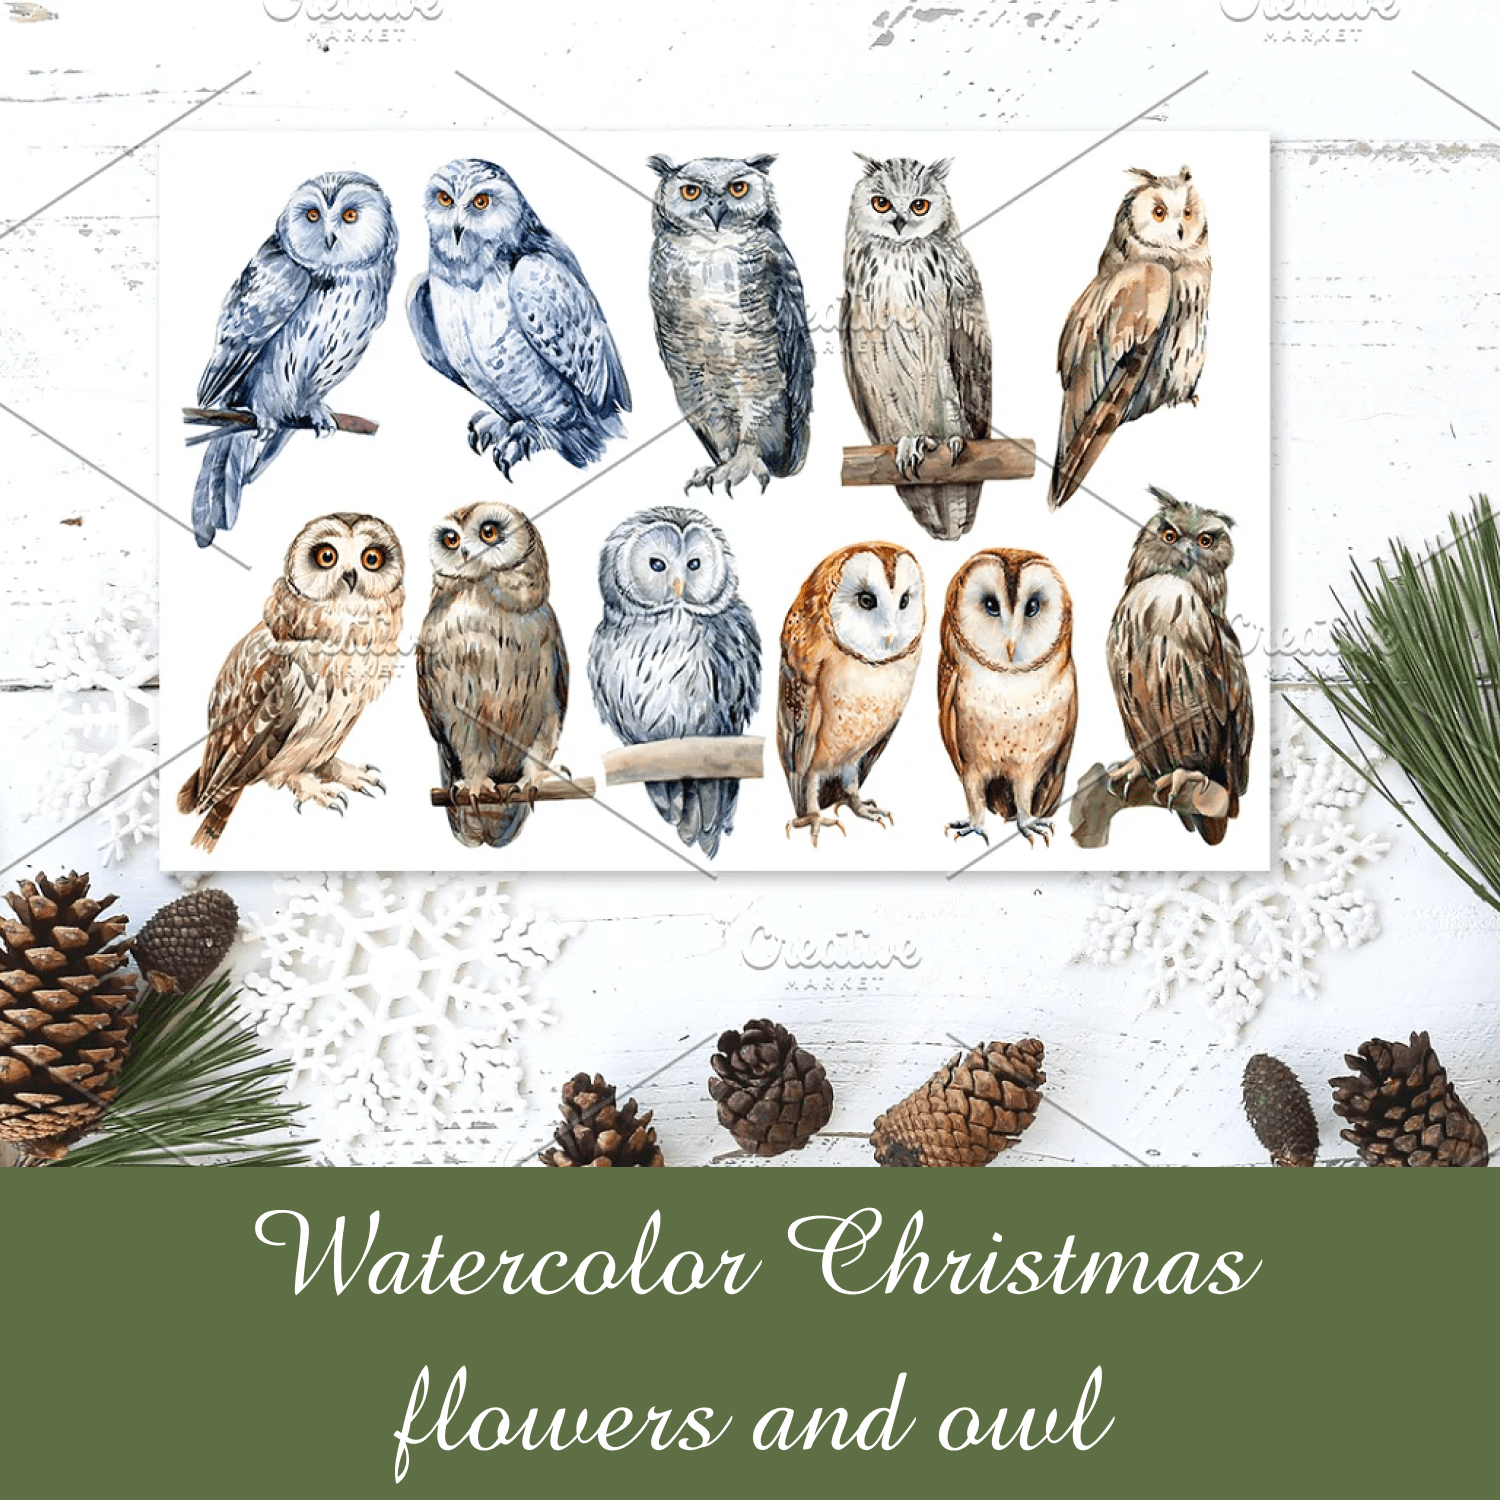 Watercolor Christmas flowers and owl cover.